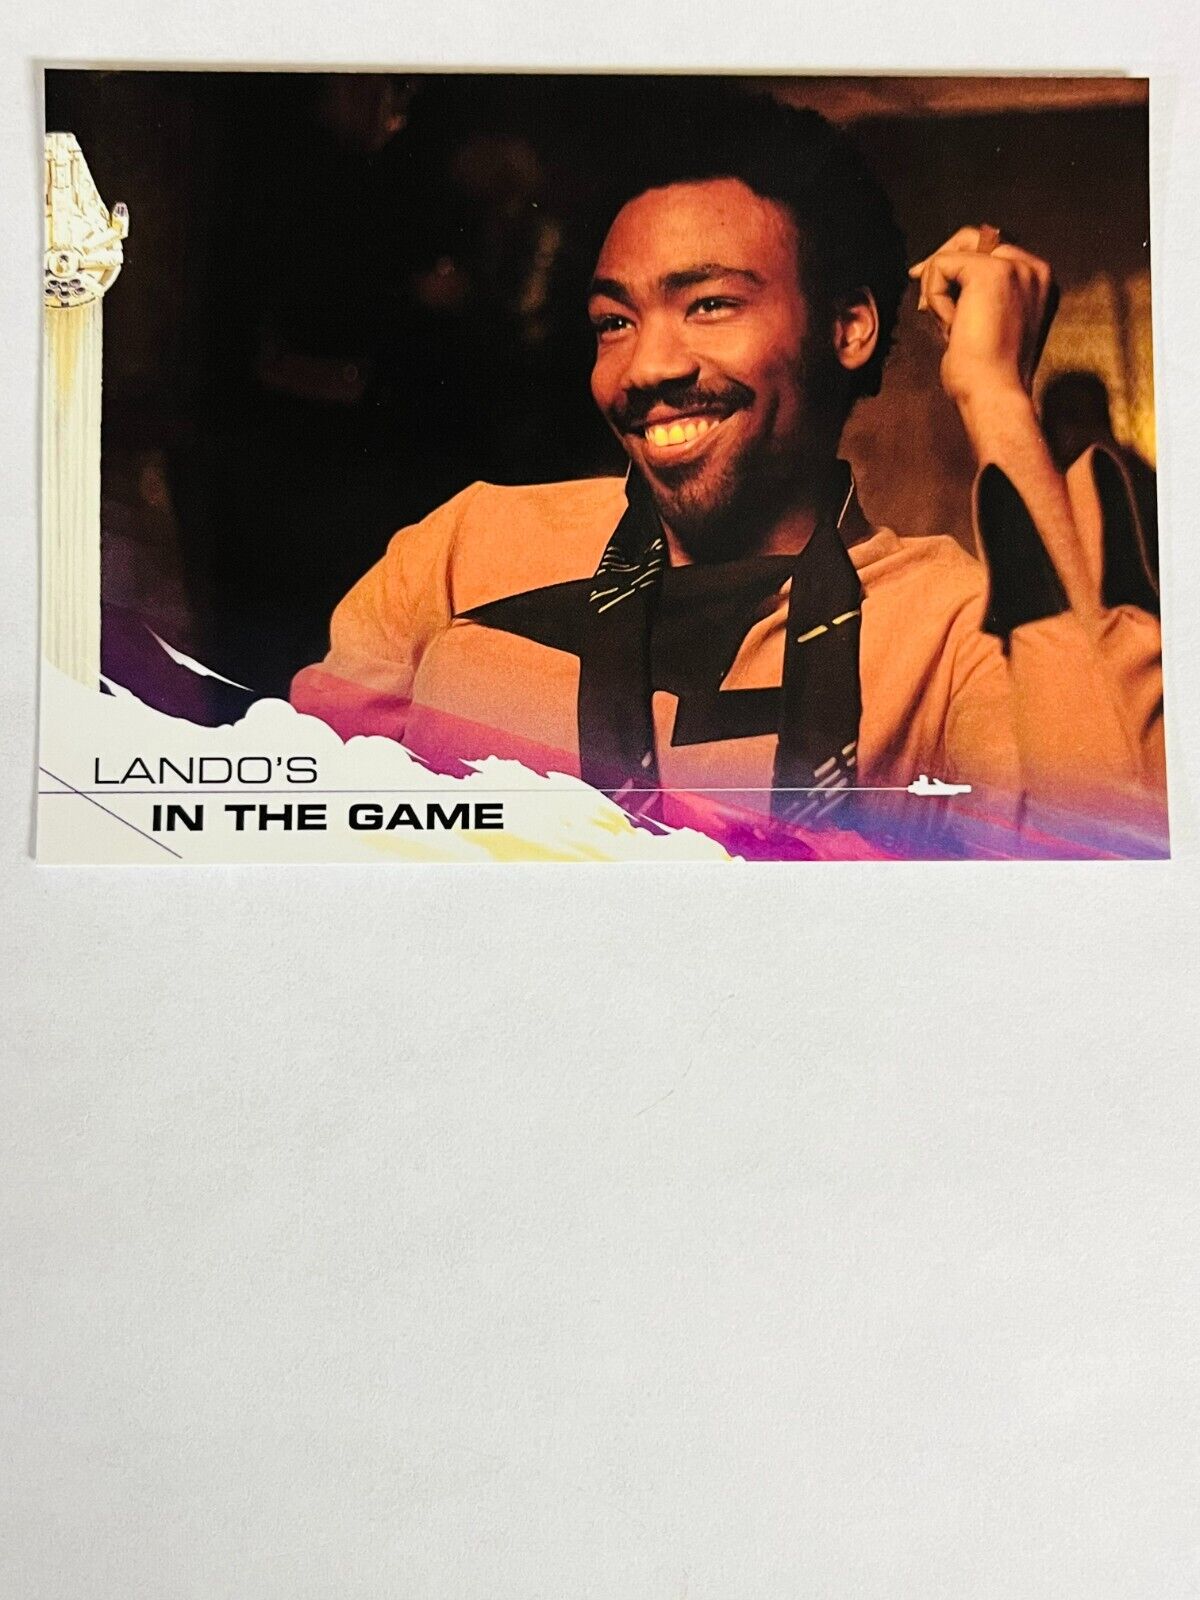 2018 Topps Solo A Star Wars Story Base Card #71  Lando’s in the Game